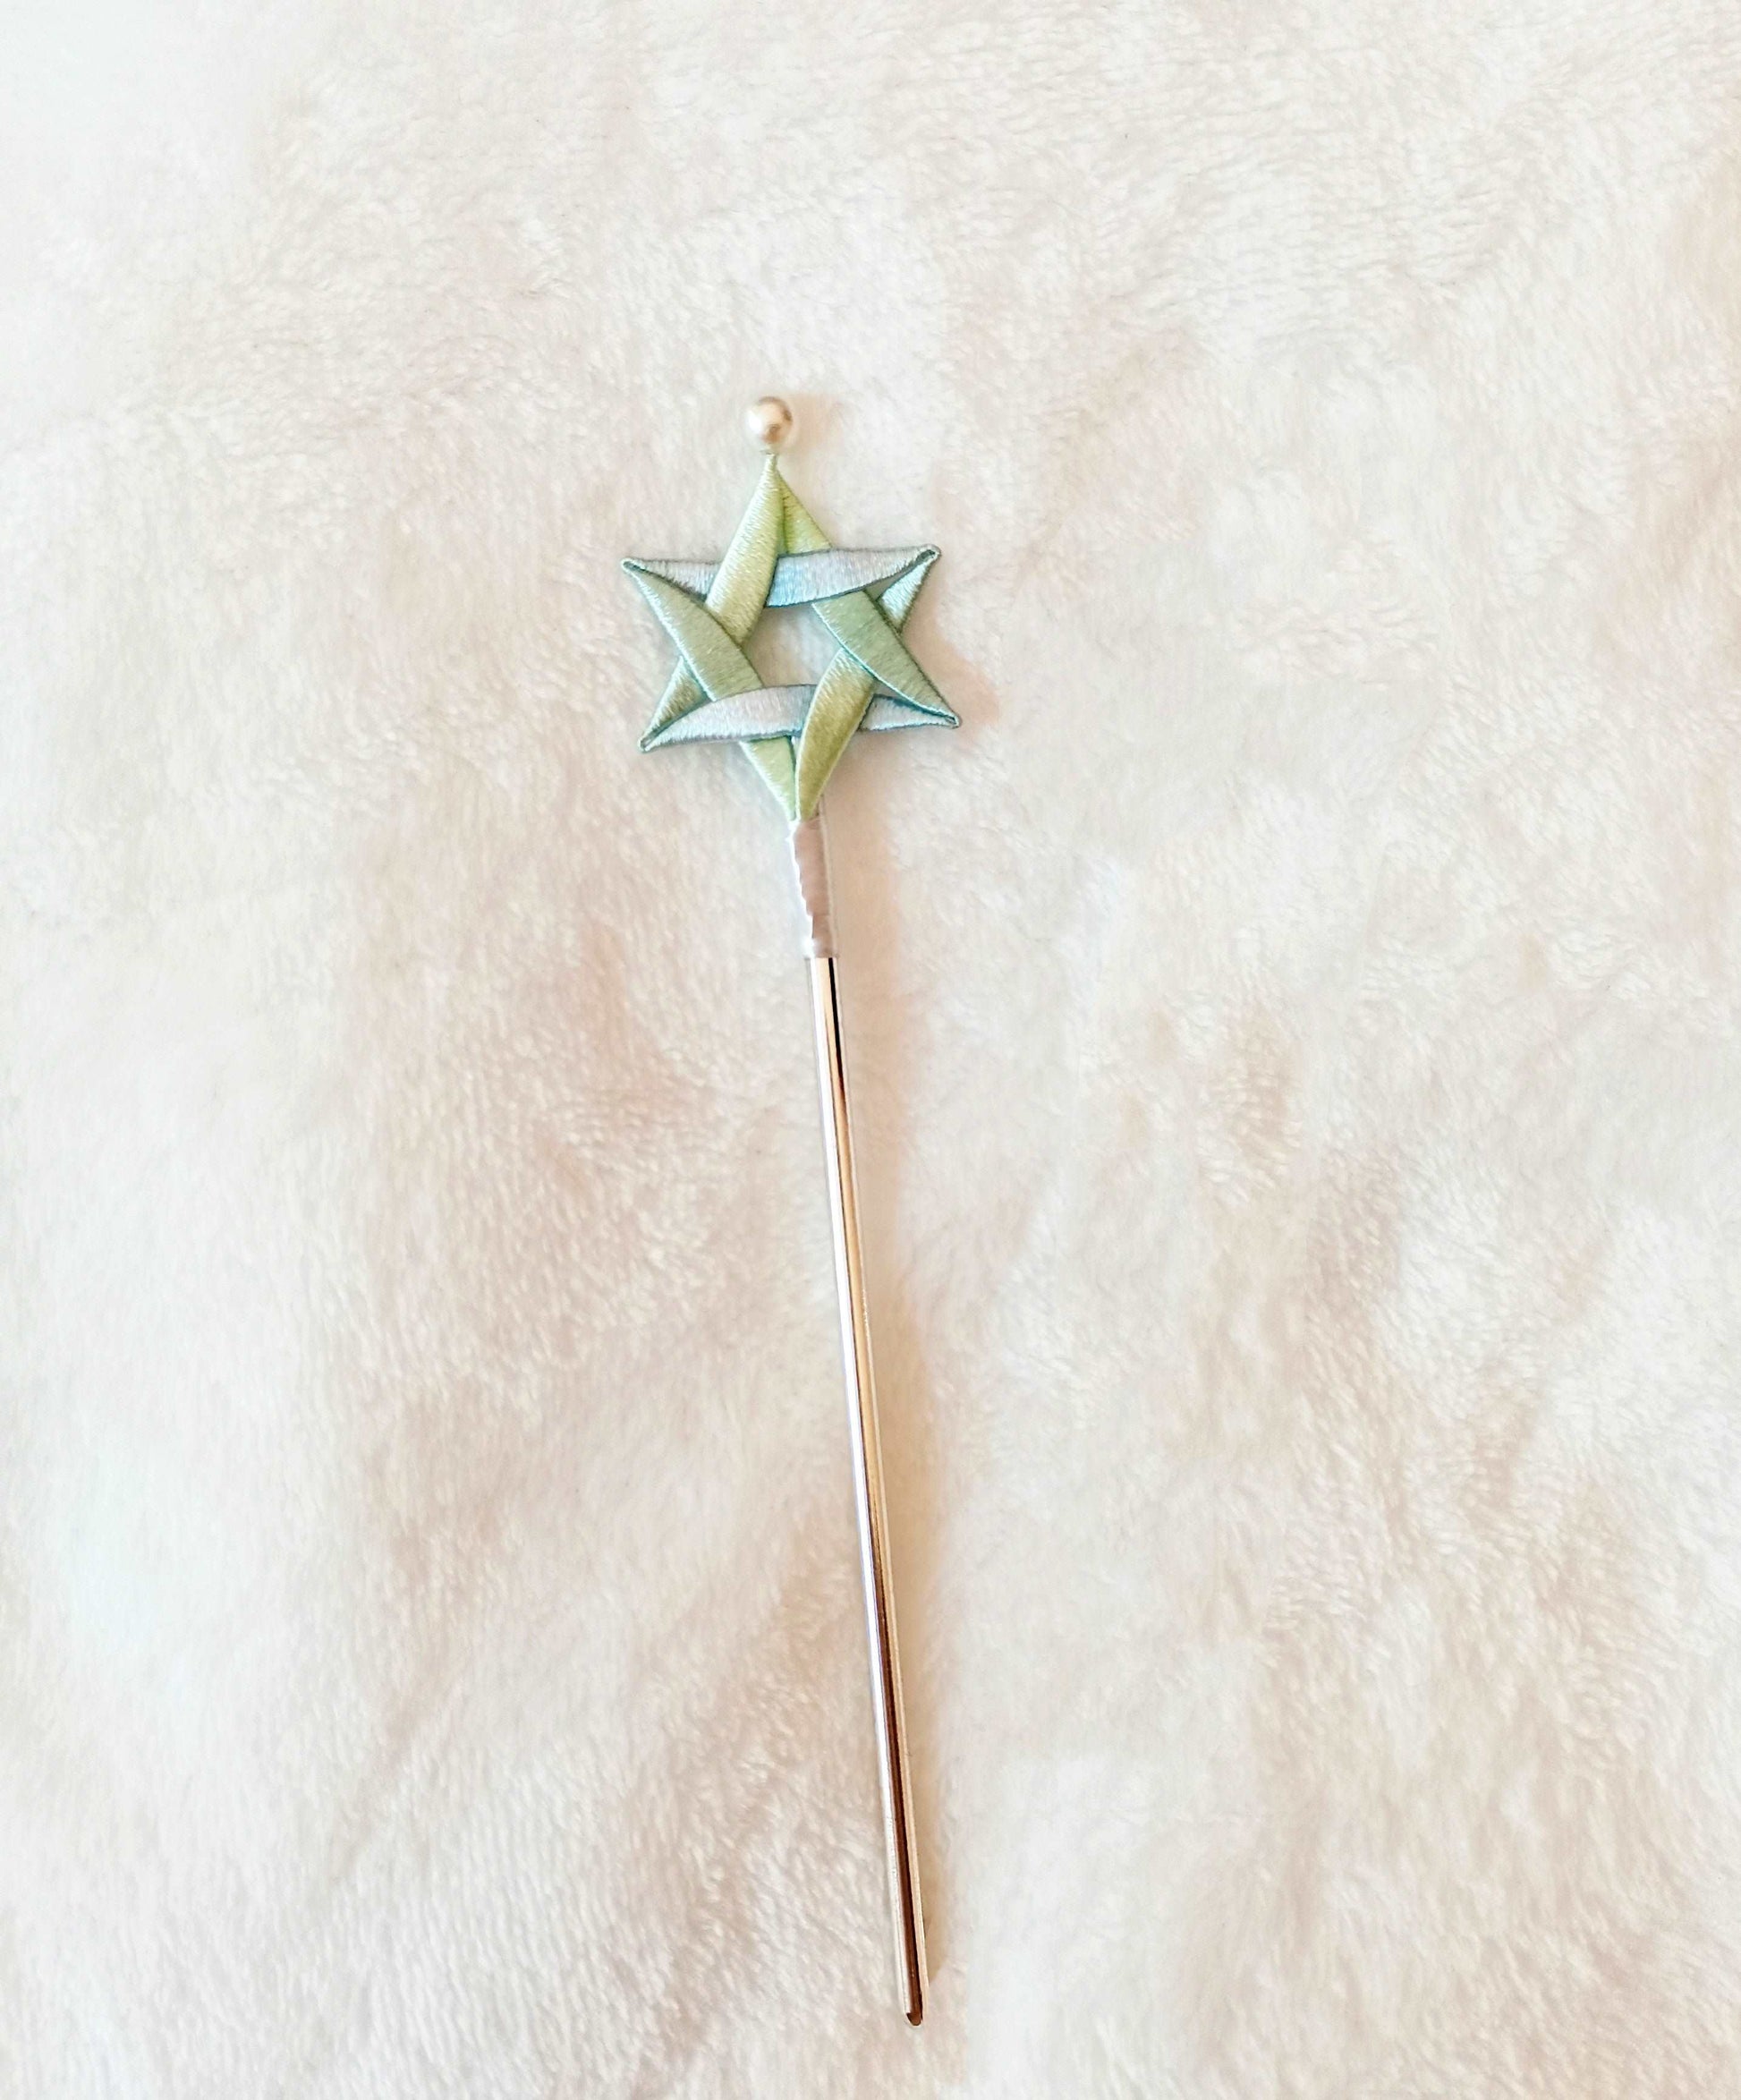 Vintage-Inspired Star Hairpin Collection